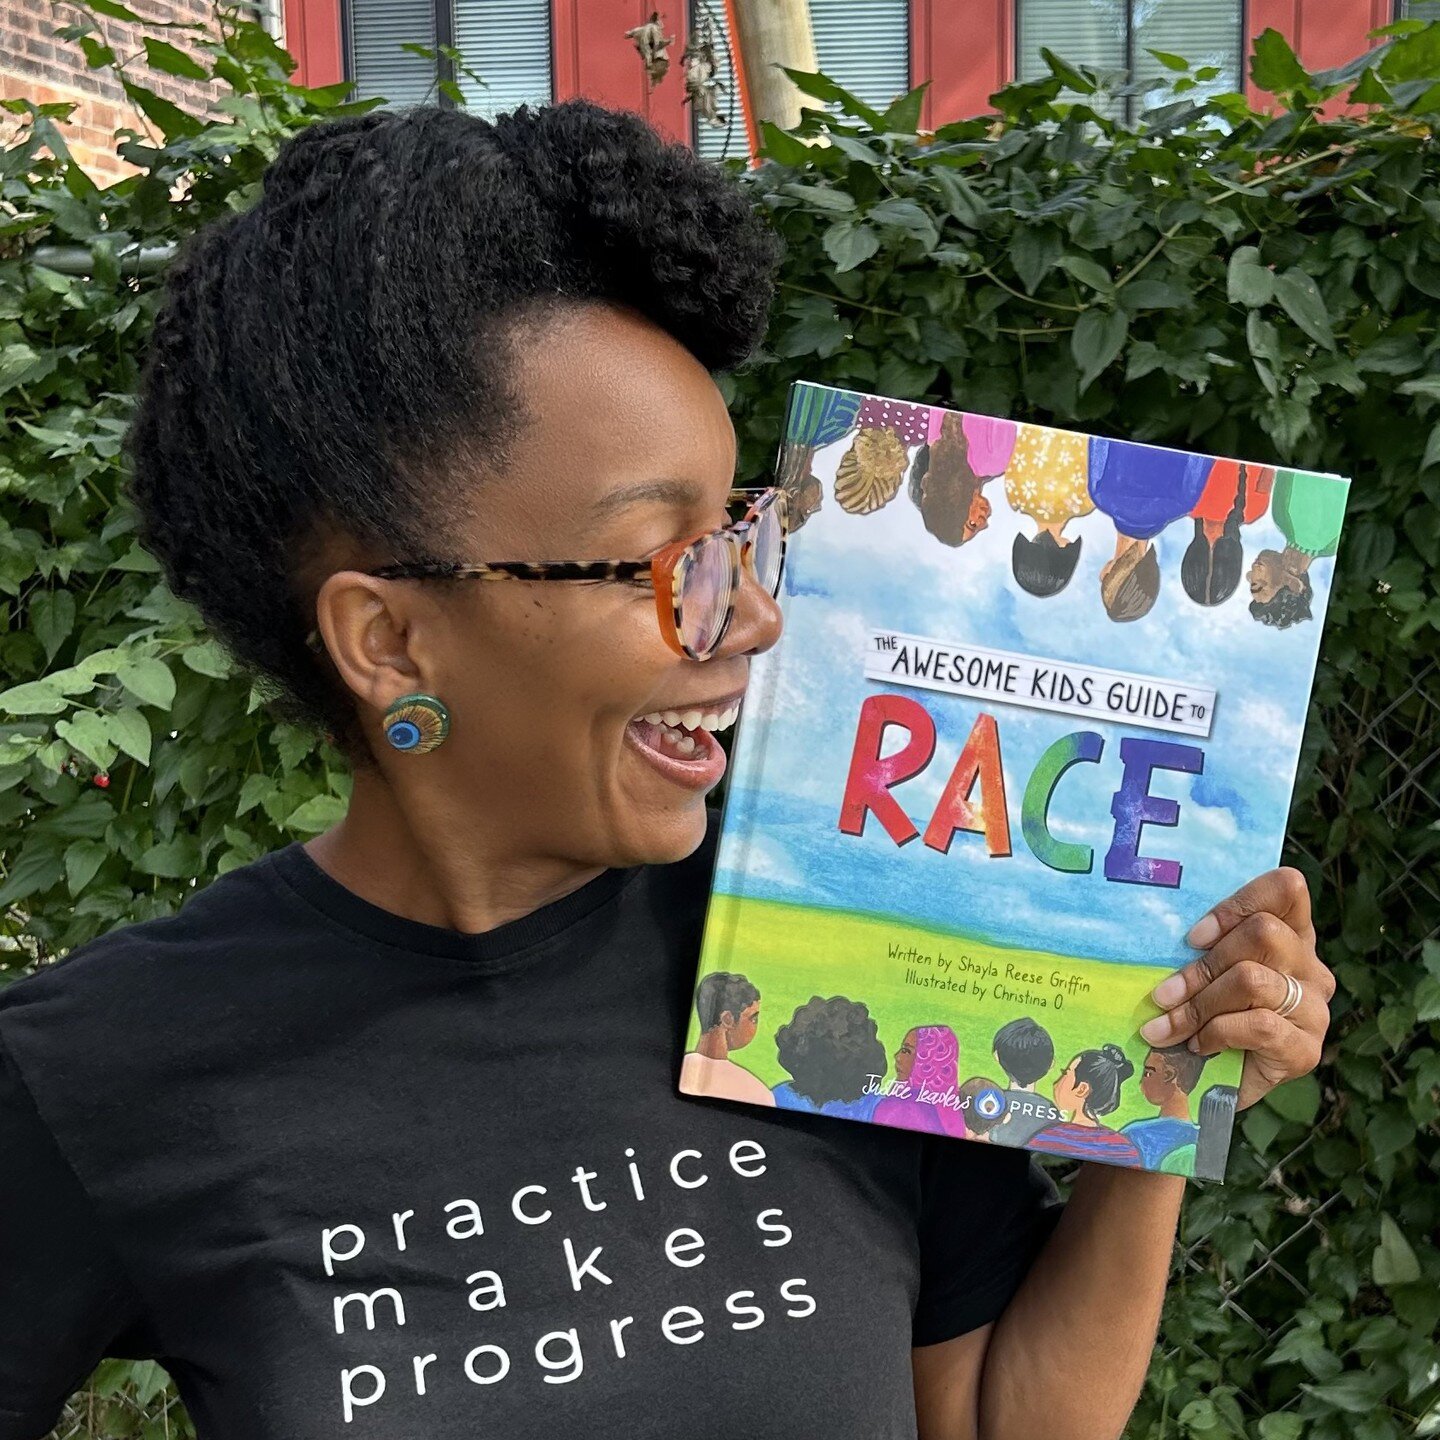 We are so excited to announce the release of The Awesome Kids Guide to Race! Written by Justice Leaders Collaborative co-founder, Shayla Reese Griffin, illustrated by Christina O. (https://linktr.ee/christinaoart). It's now available in Paperback, Ha